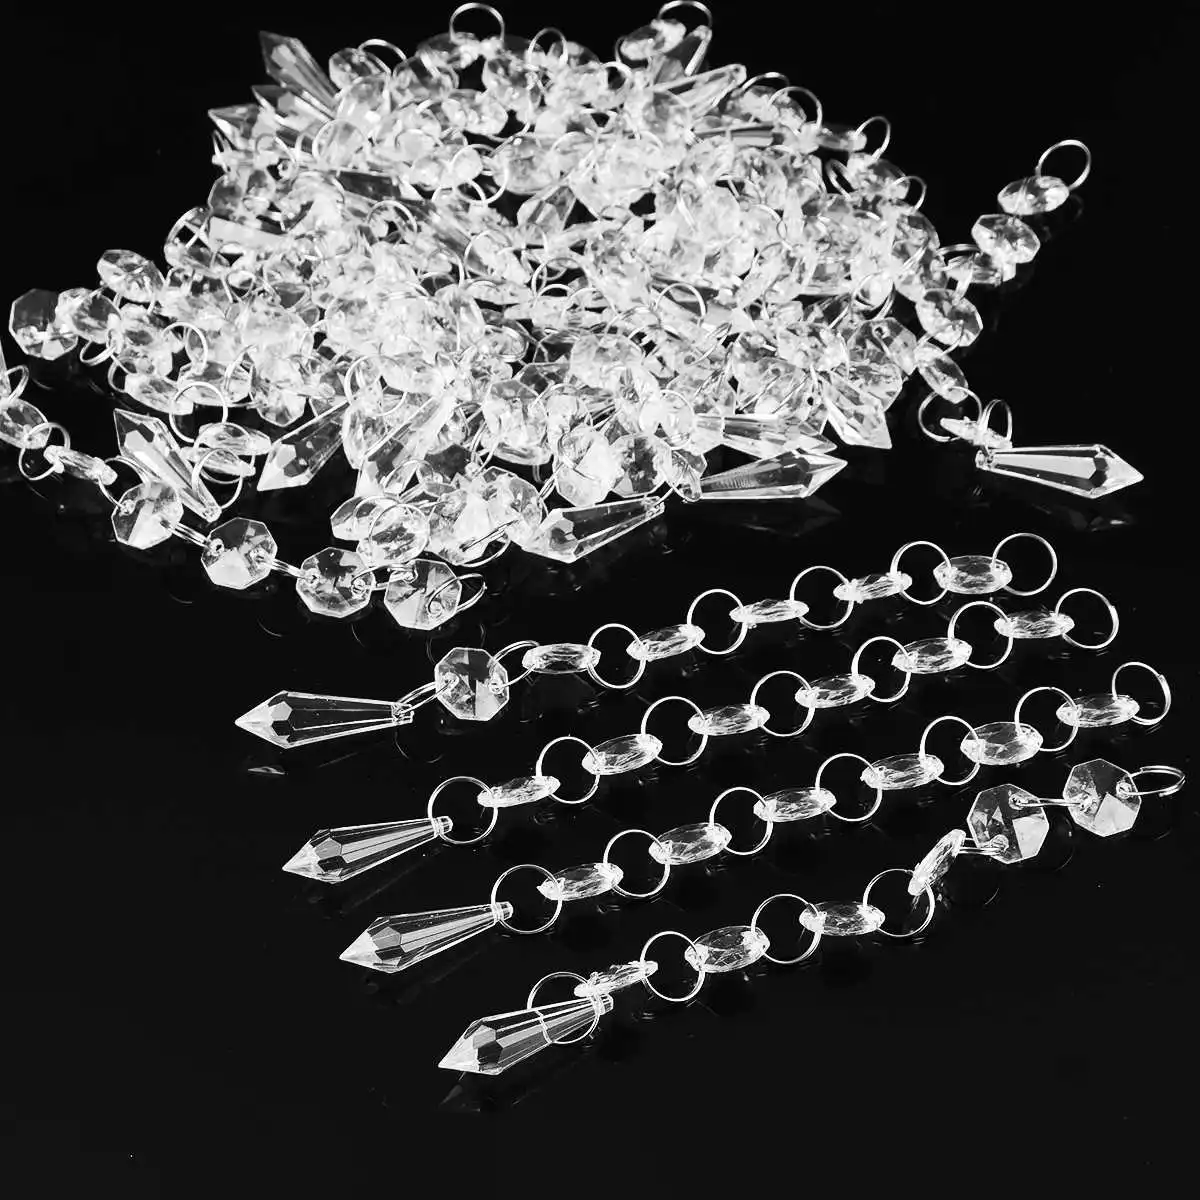 30Pcs Acrylic Crystal Beads Garland Chandelier Hanging Wedding Party Home Decor 